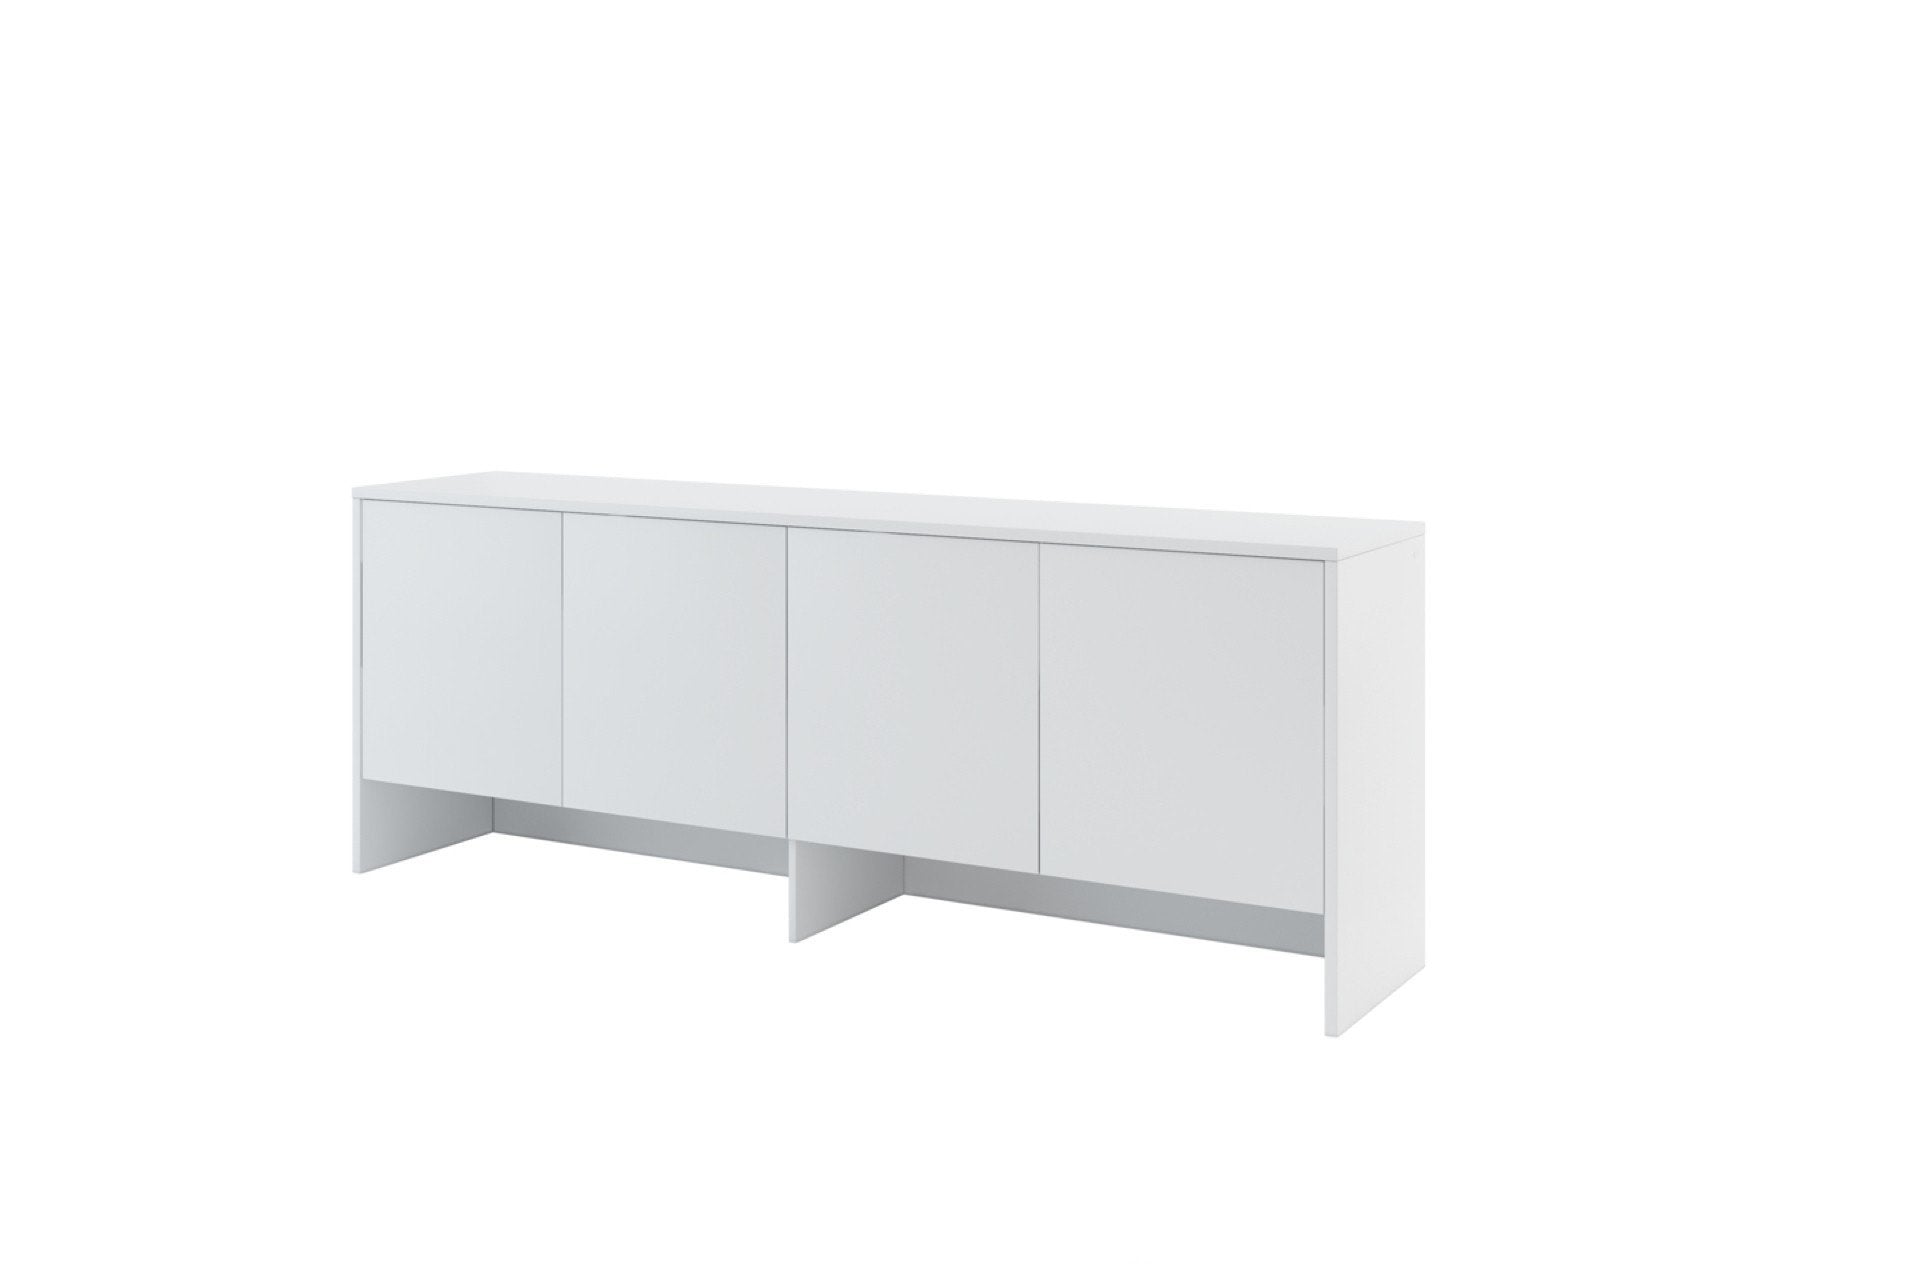 BC-10 Over Bed Unit for Horizontal Wall Bed Concept 120cm White Matt Wall Bed with Storage Unit 